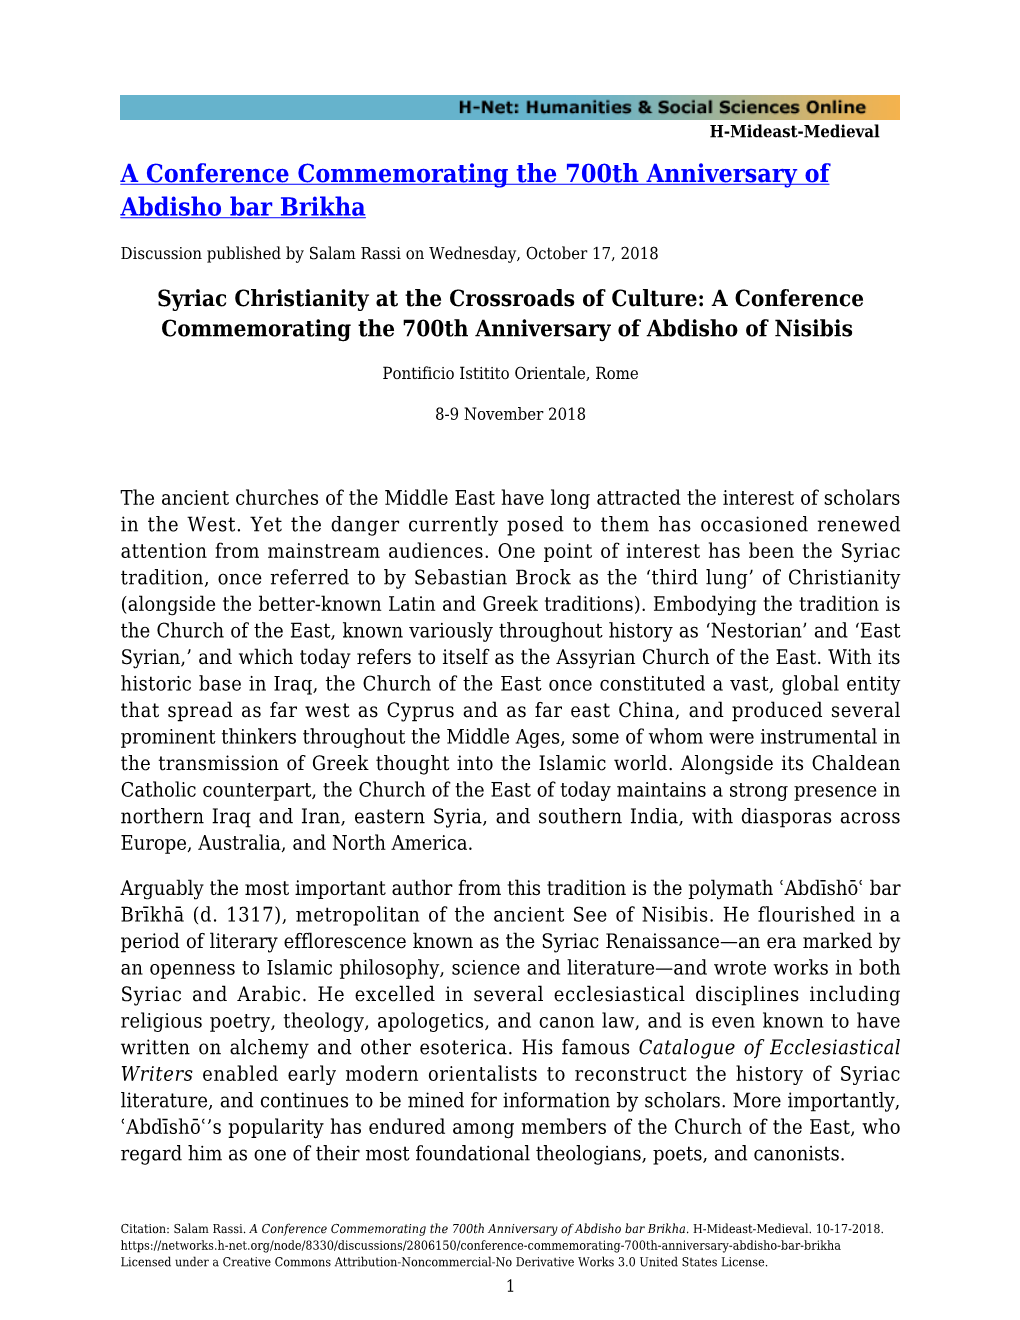 A Conference Commemorating the 700Th Anniversary of Abdisho Bar Brikha